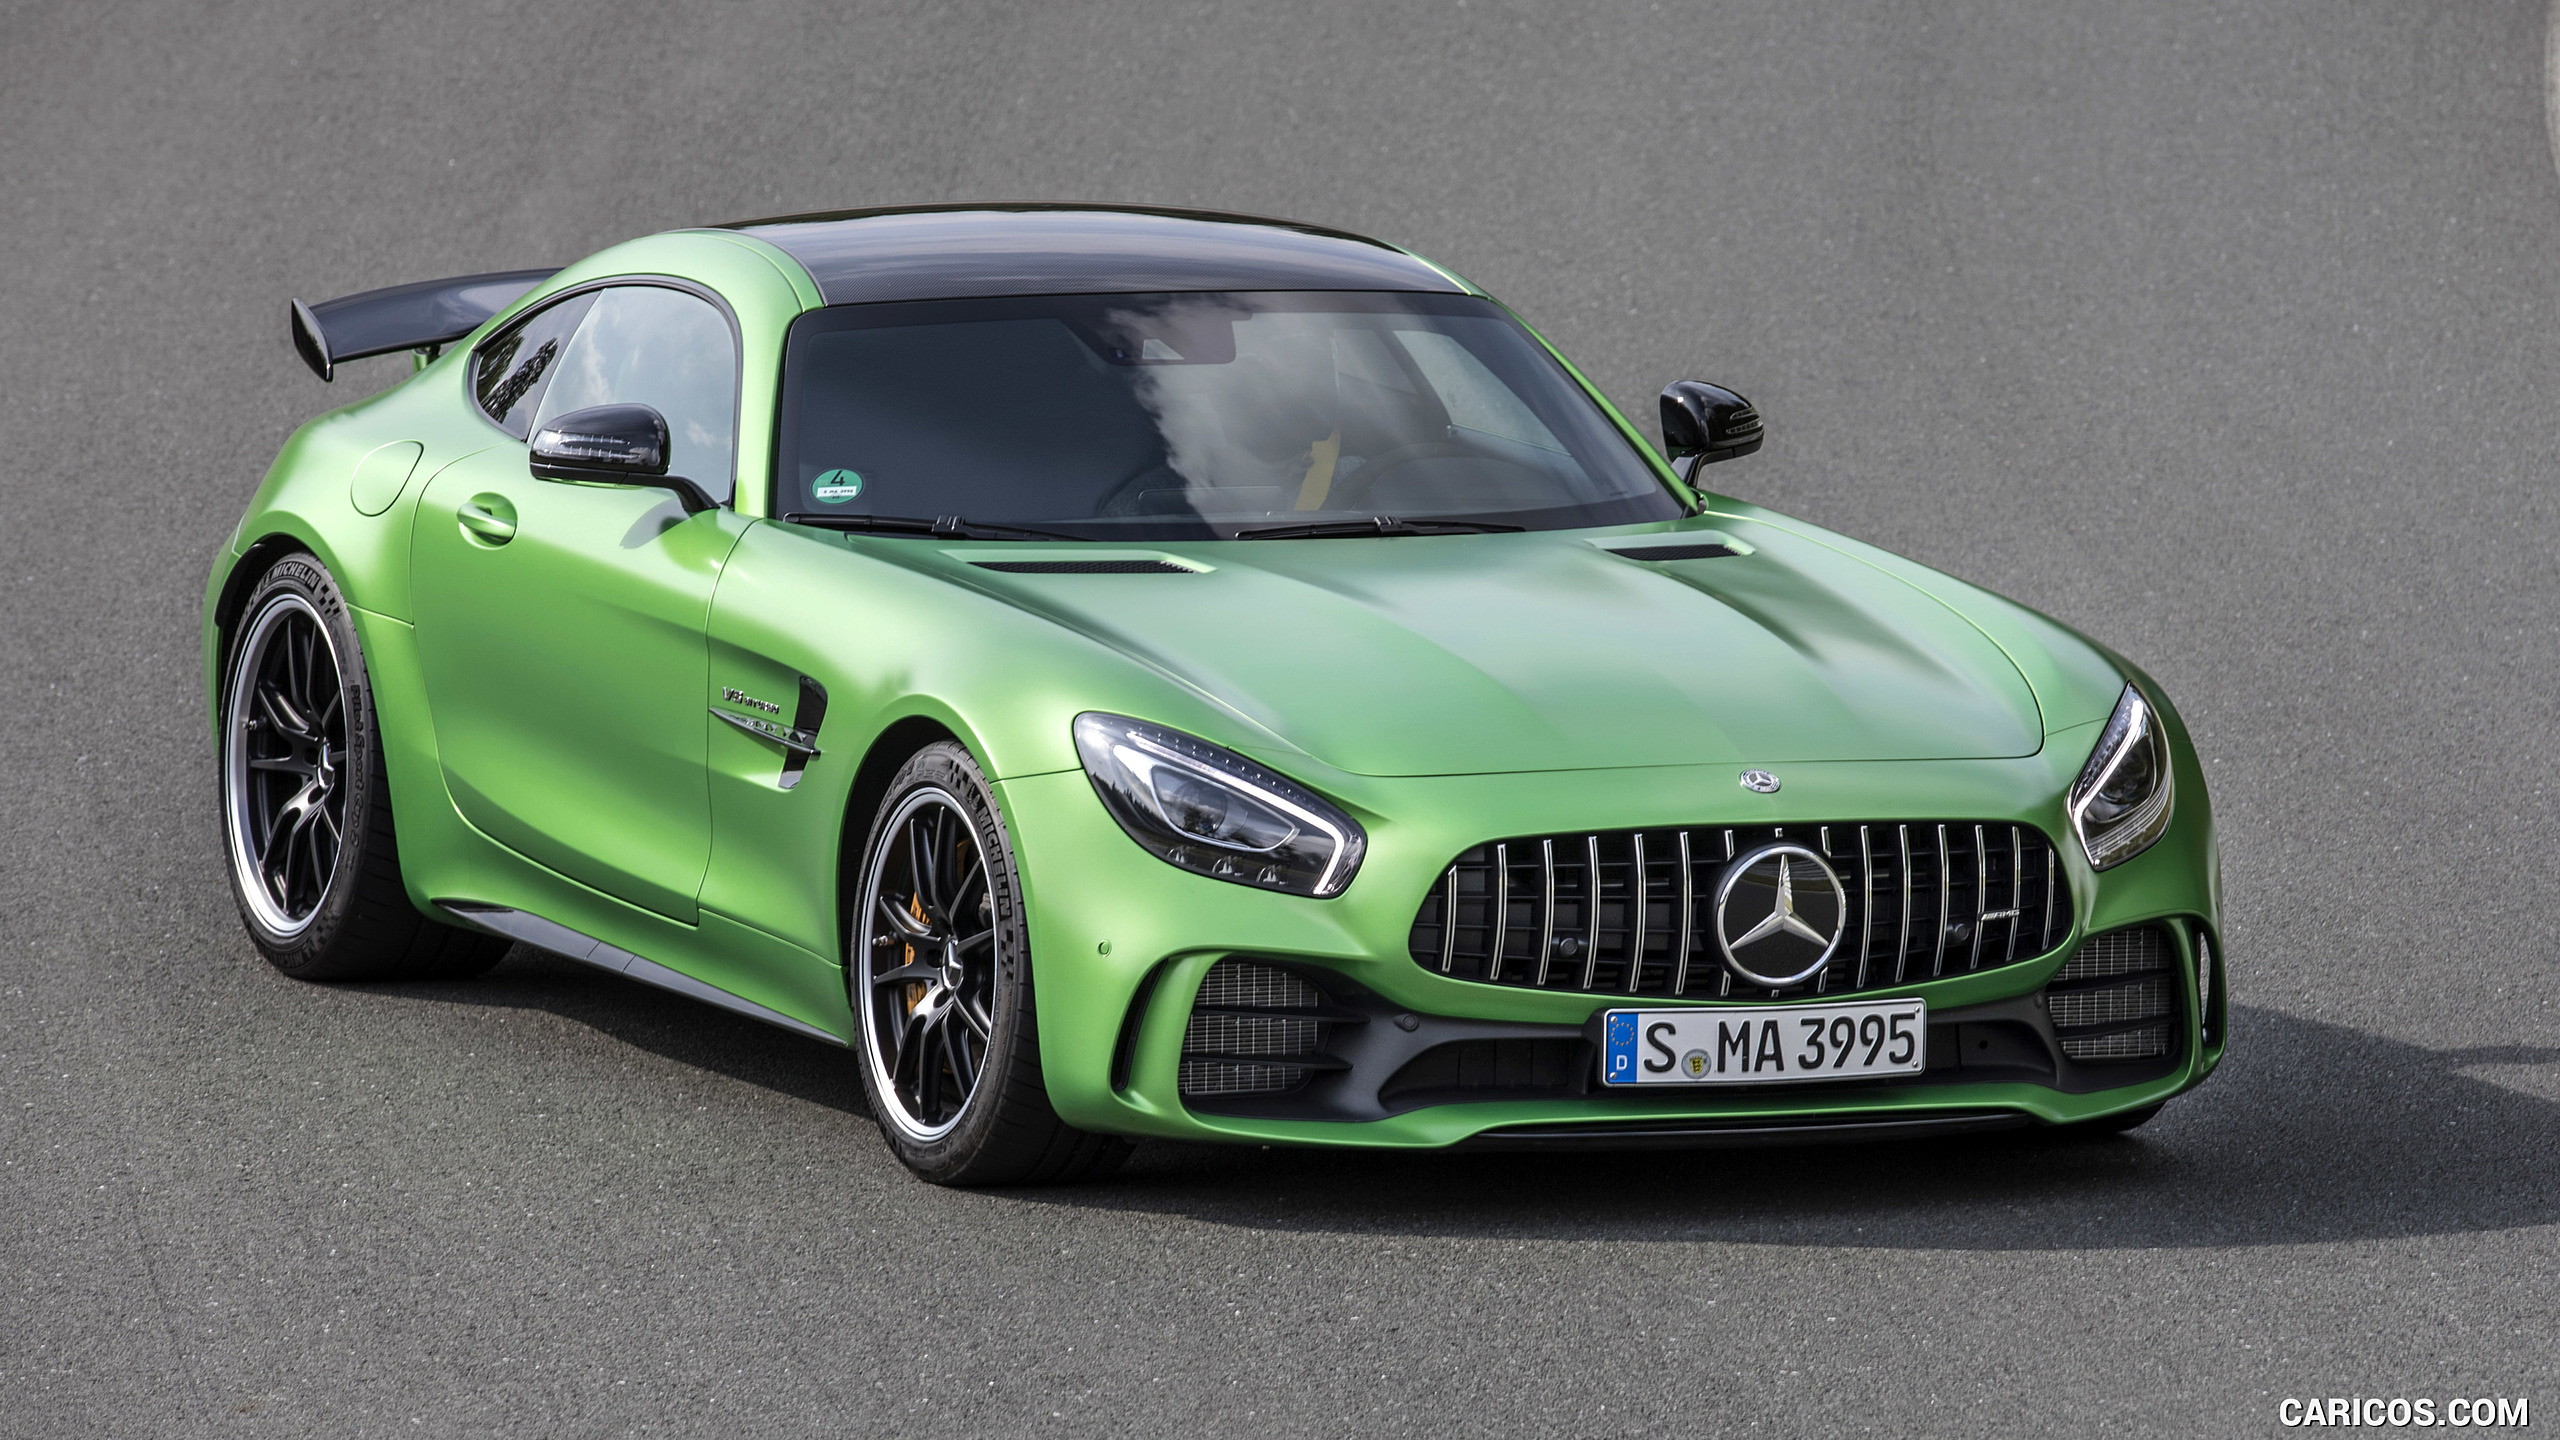 2017 Mercedes-AMG GT R Coupe - Front Three-Quarter, #167 of 182